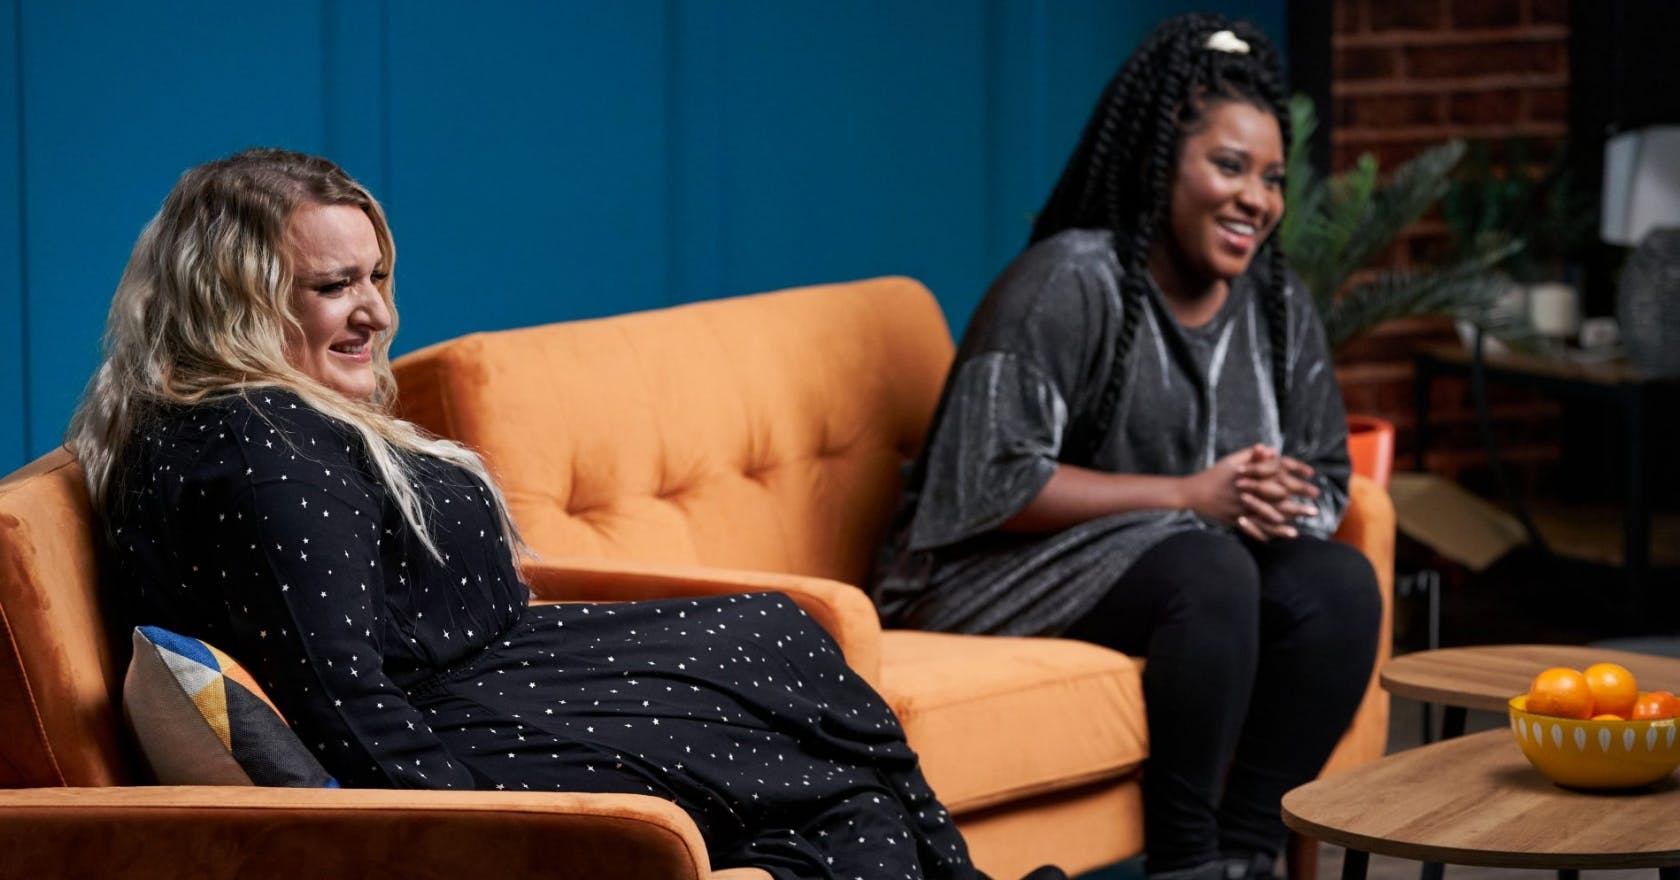 Dating No Filter review: Daisy May Cooper’s new show is Gogglebox meets First Dates